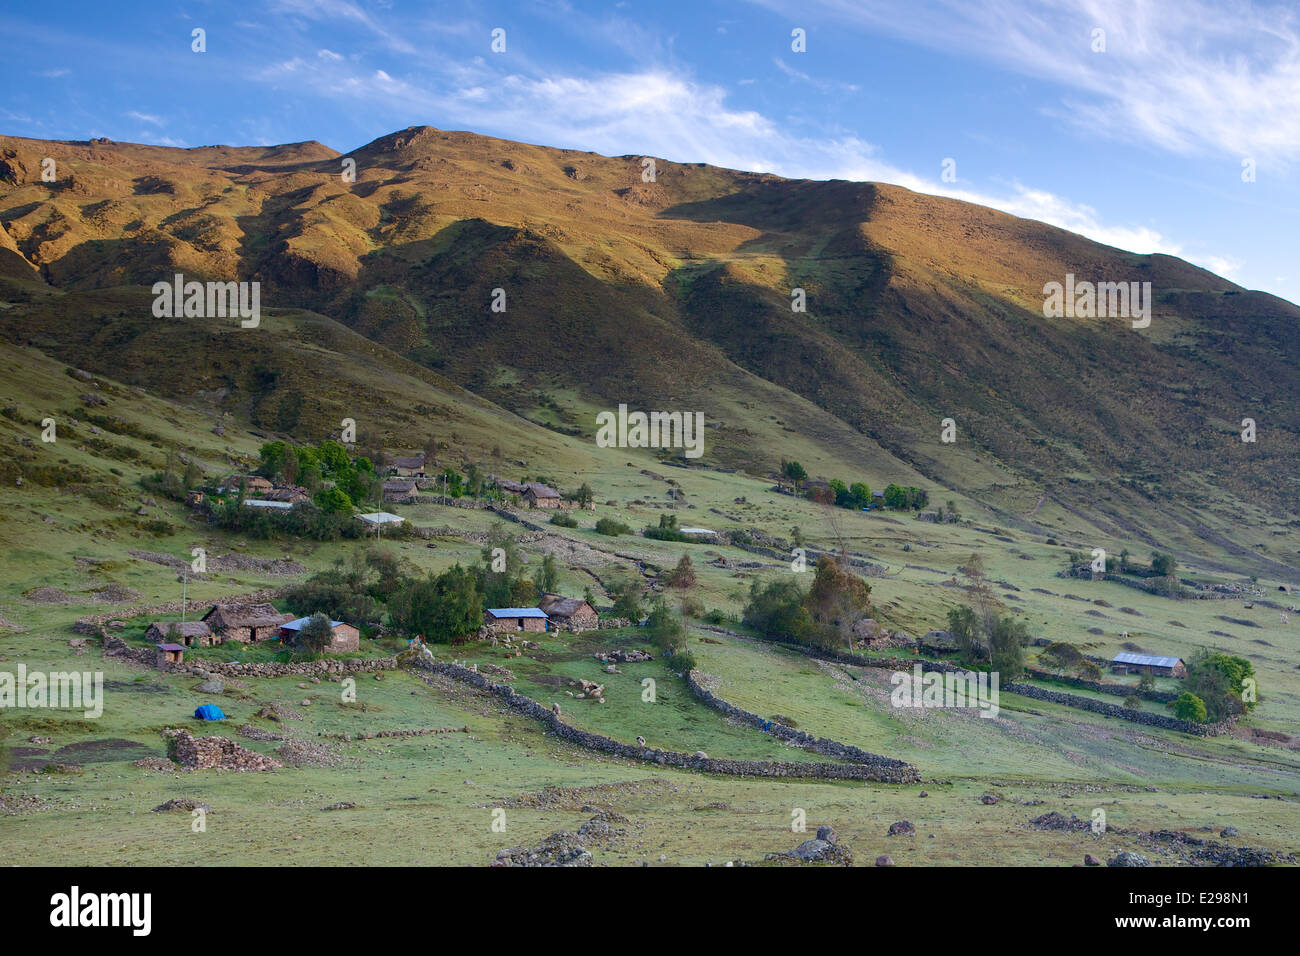 A traditional indigenous Quechua village in the Lares Valley high in the Andes in Peru Stock Photo